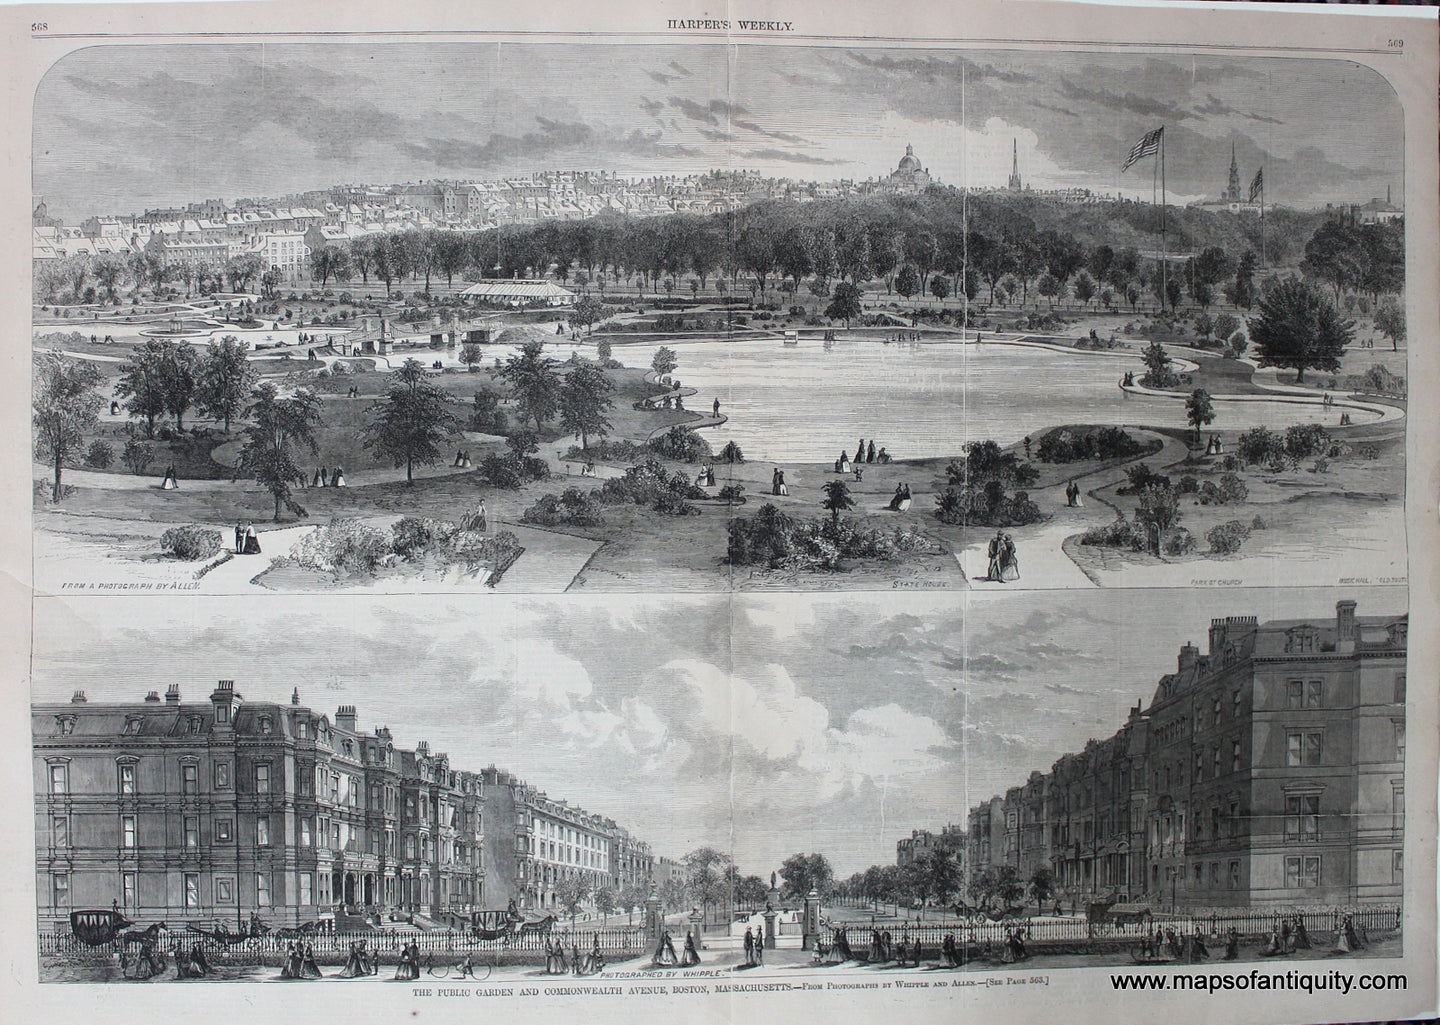 Antique-Black-and-White-Antique-City-Views-The-Public-Garden-and-Commonwealth-Avenue-Boston-Massachusetts.-**********---1867-Harper's-Weekly-Maps-Of-Antiquity